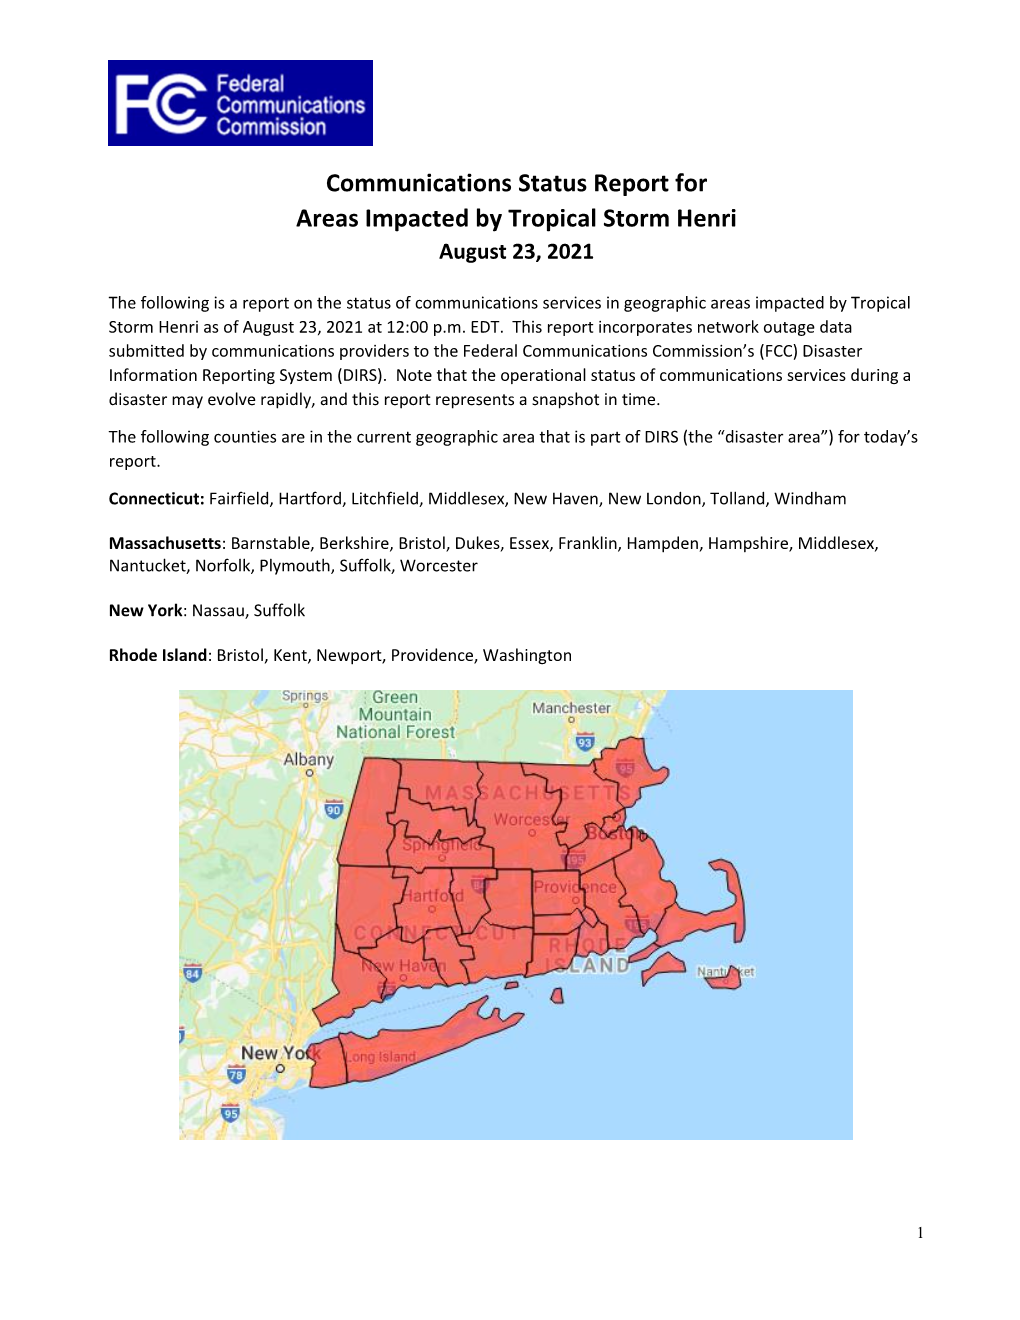 Communications Status Report for Areas Impacted by Tropical Storm Henri August 23, 2021